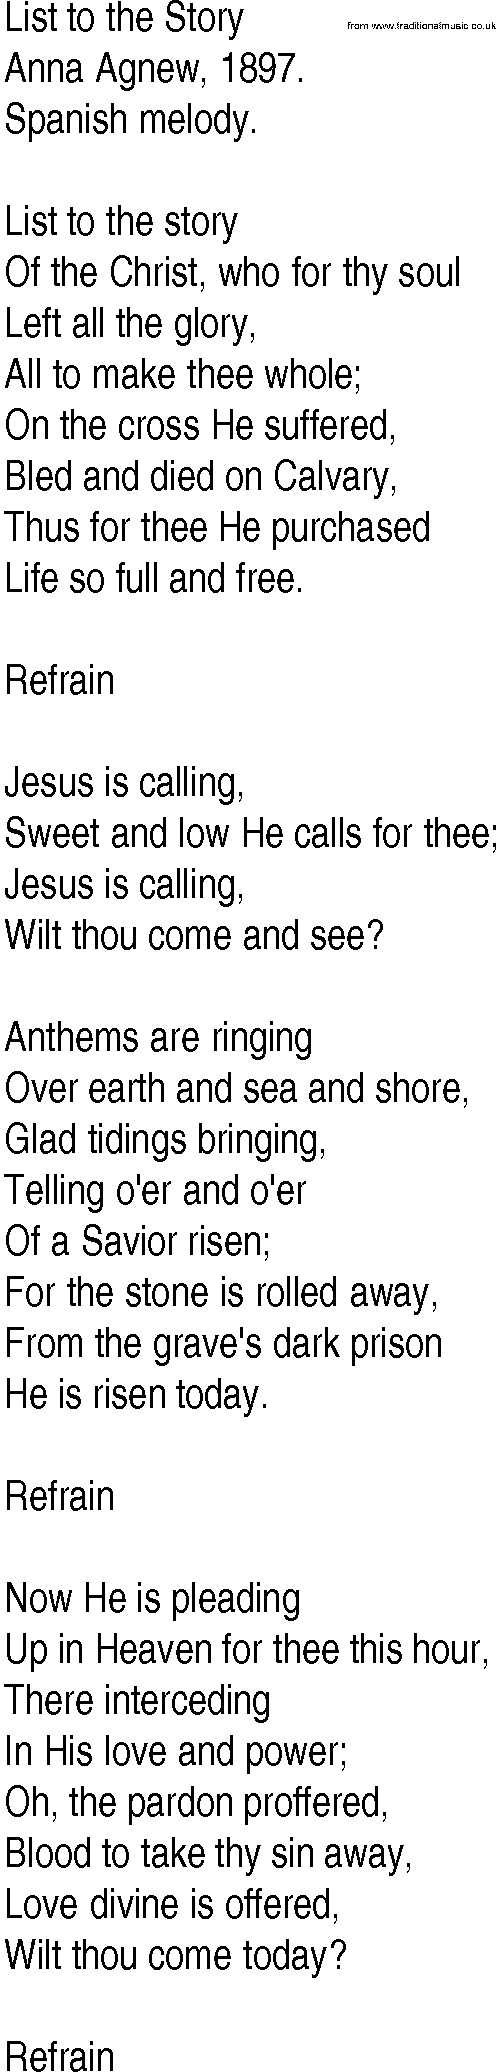 Hymn and Gospel Song: List to the Story by Anna Agnew lyrics